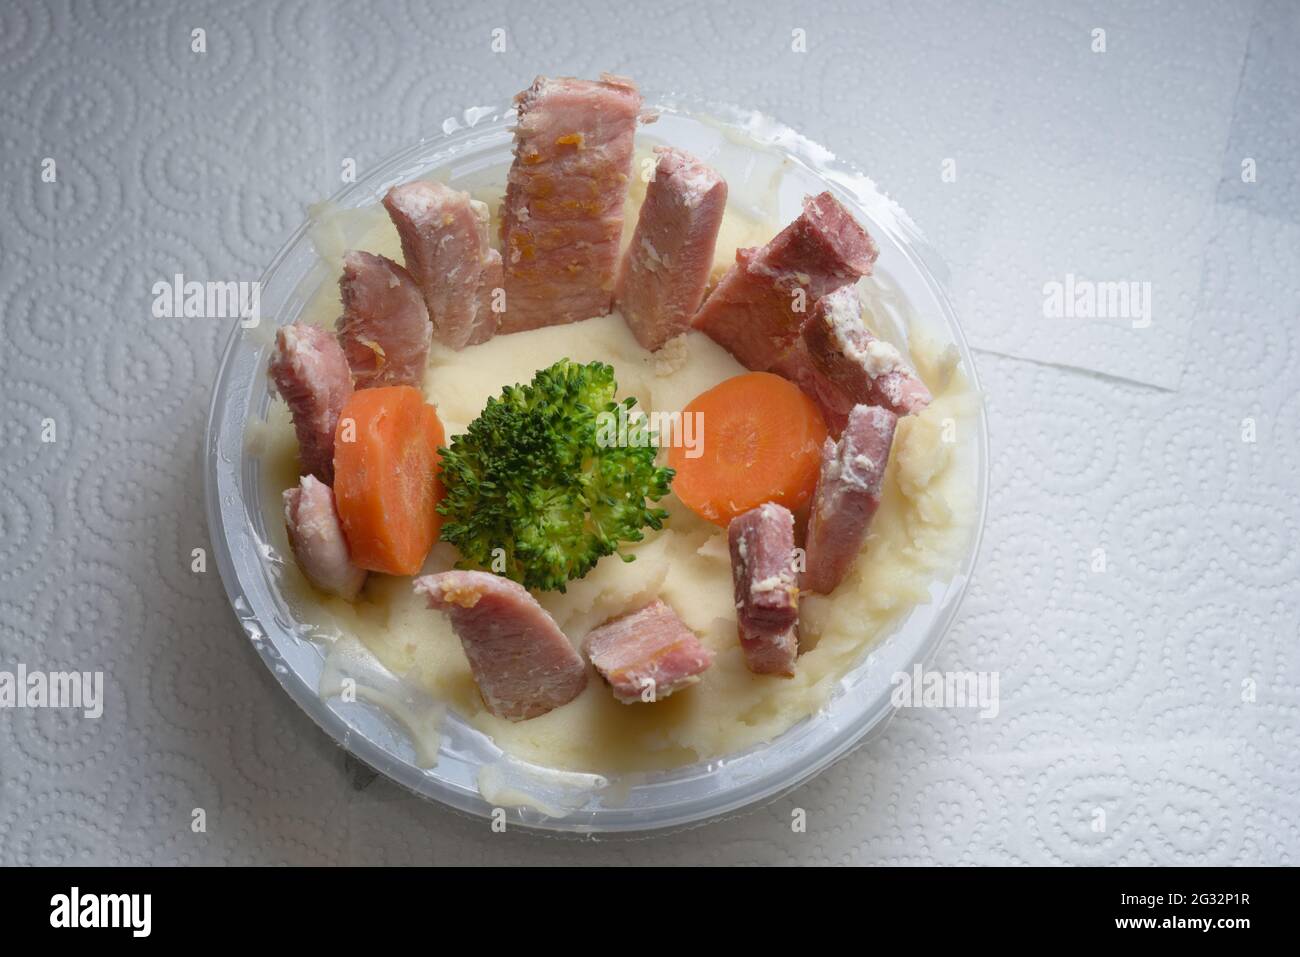 Tub of potato mash on top of white kitchen roll. Unusual presentation of meat and vegetables. Homemade twist on a supermarket ready meal Stock Photo